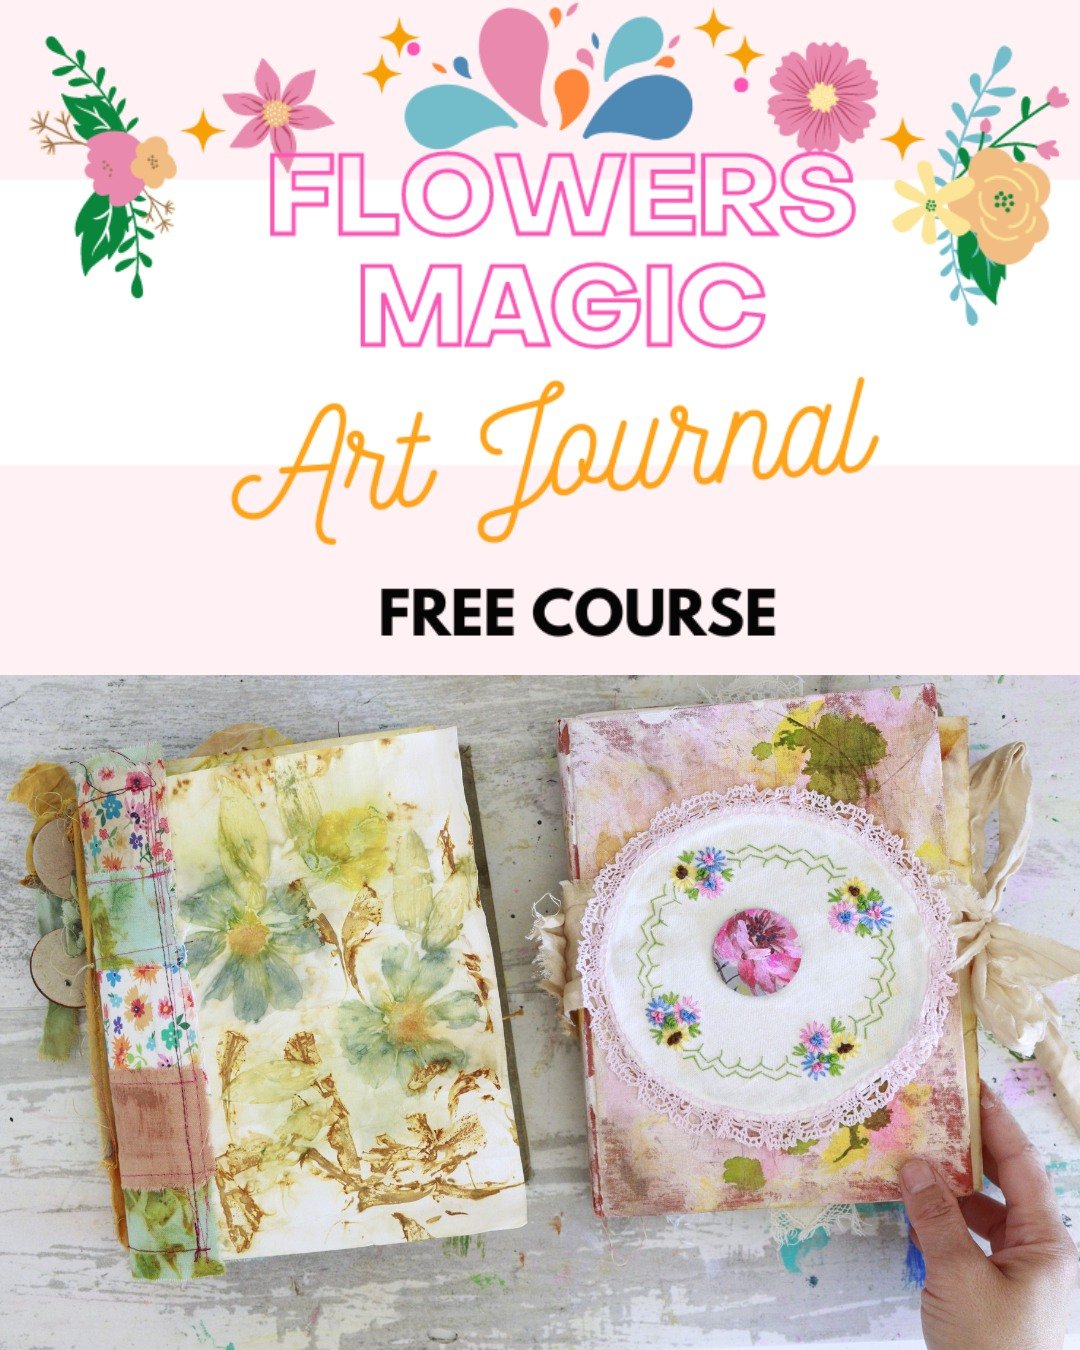 Free Flowers Magic Art Journal class is open again to sign up! 😍

That's right! You heard it well. 🌺 ✨ Get ready to celebrate the magic of mixed media, art journaling, and flowers! Join me for the FREE Flowers Magic Art Journal course, the perfect 